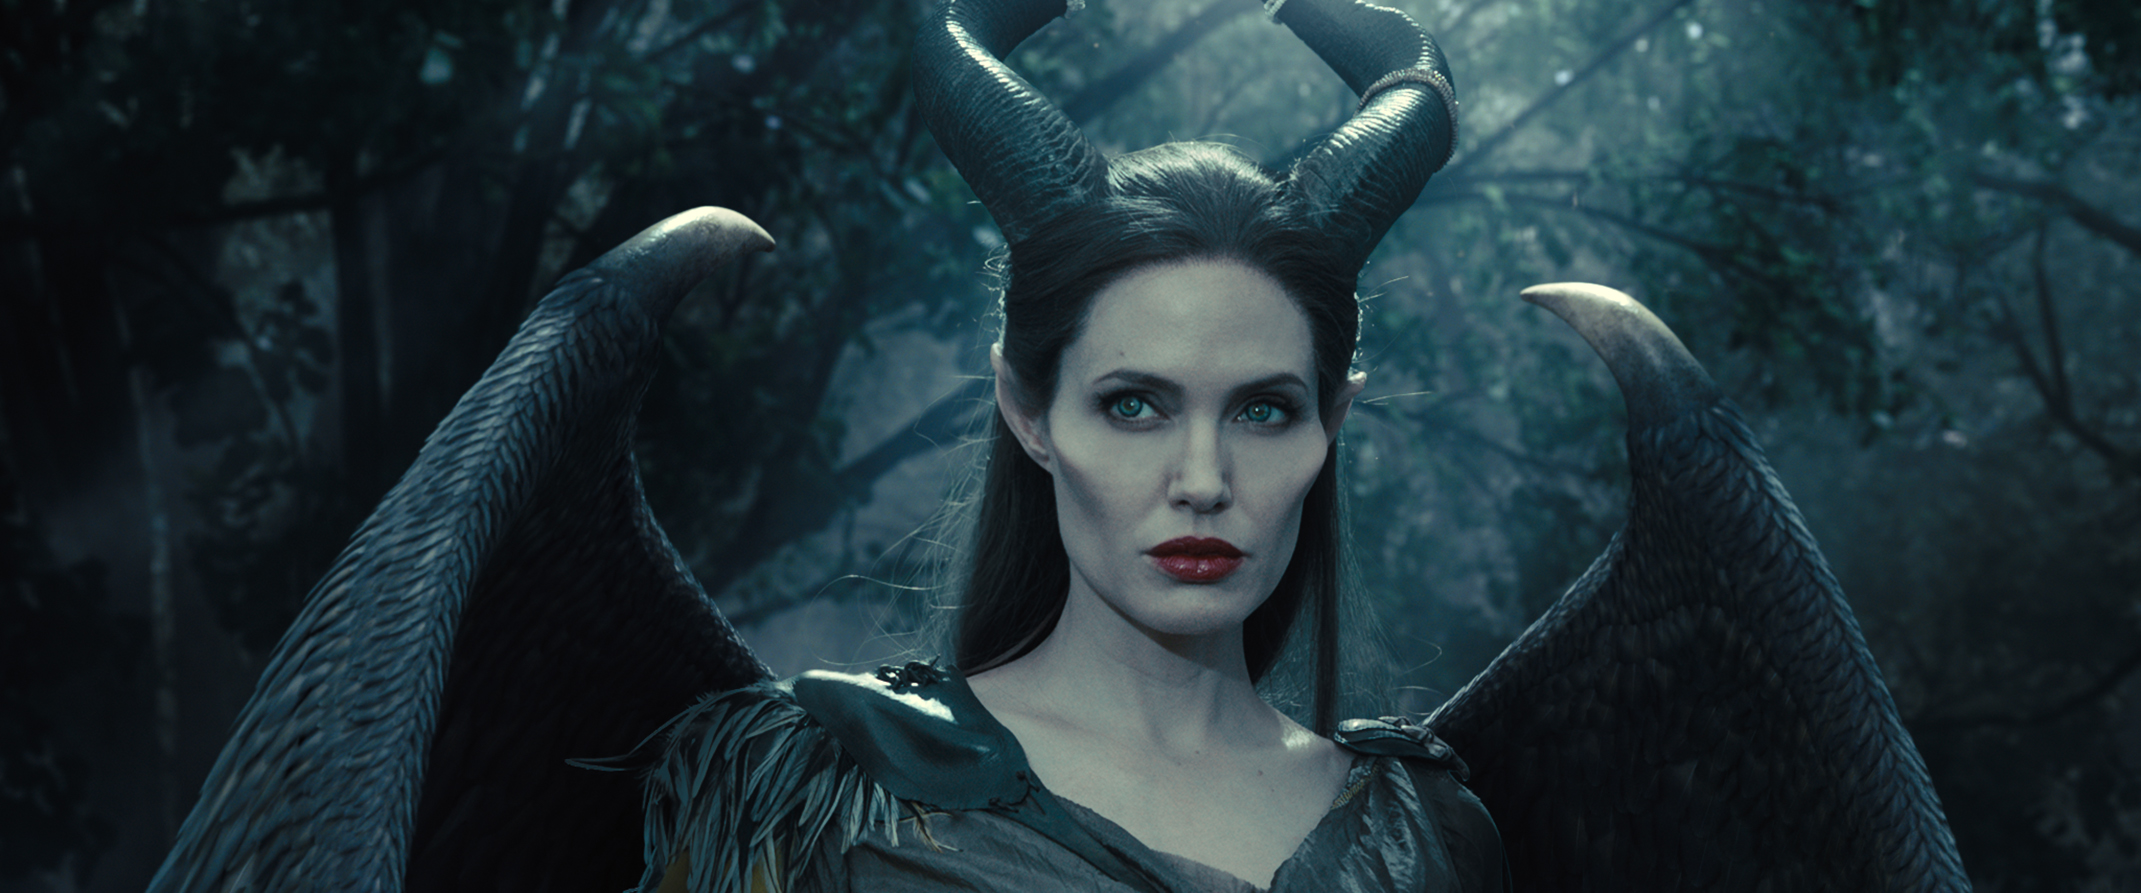 Images of Maleficent | 2141x893